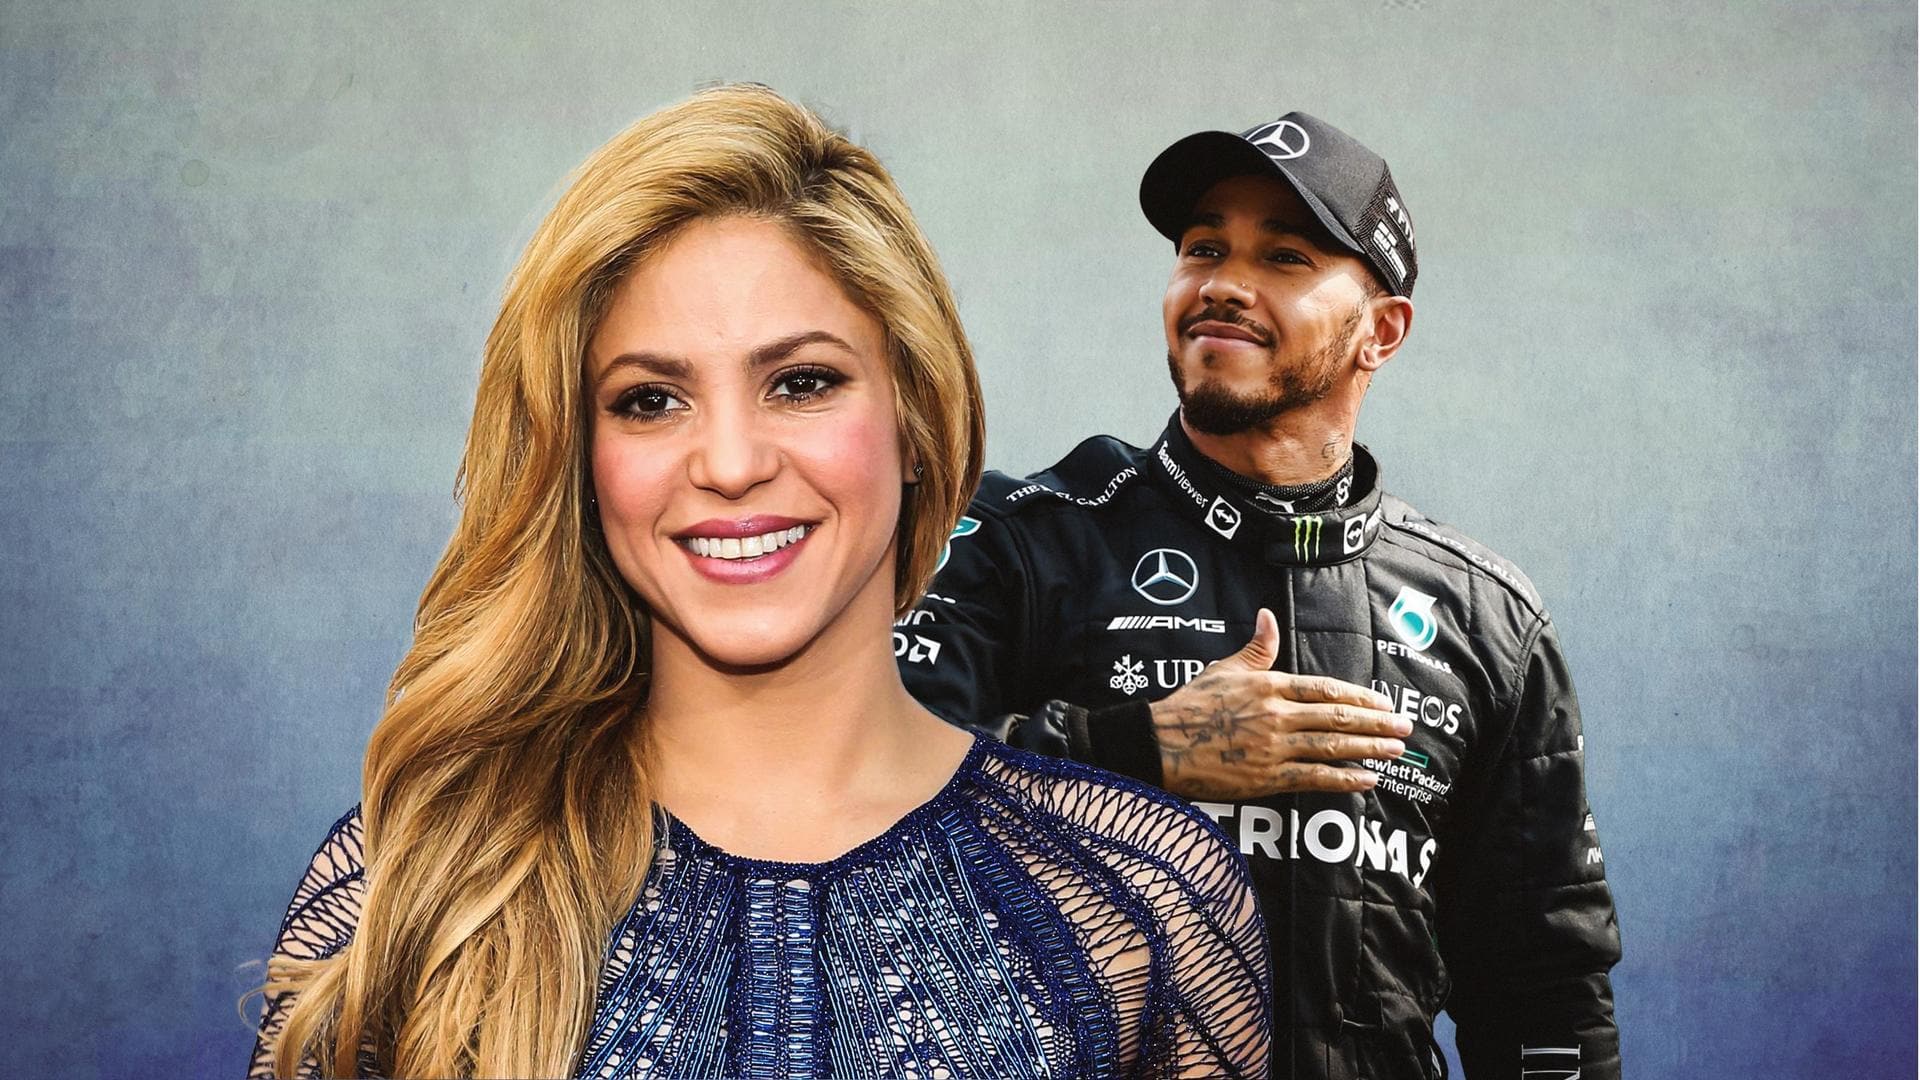 Shakira-Lewis Hamilton spark dating rumors after multiple outings together